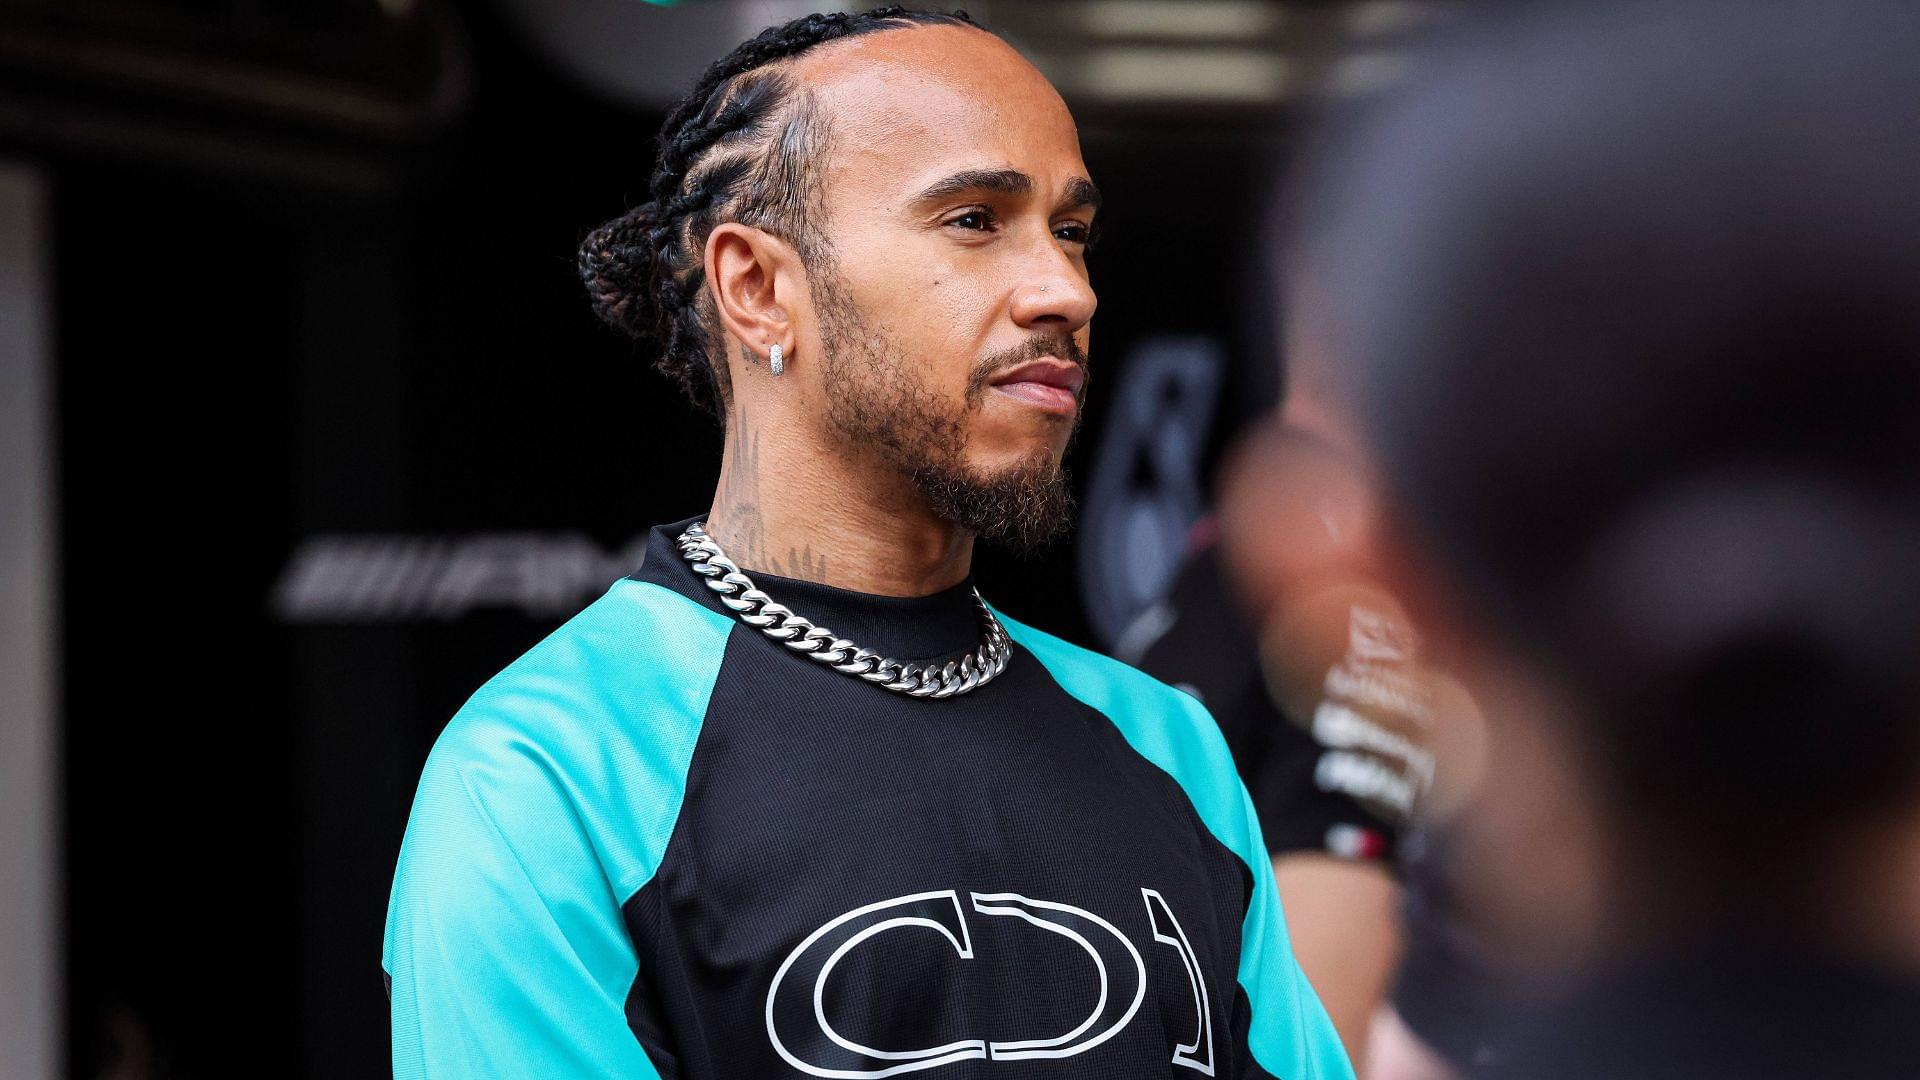 After Tussling With Mercedes Challenger, Lewis Hamilton Holds Onto Small Glimmer of Hope